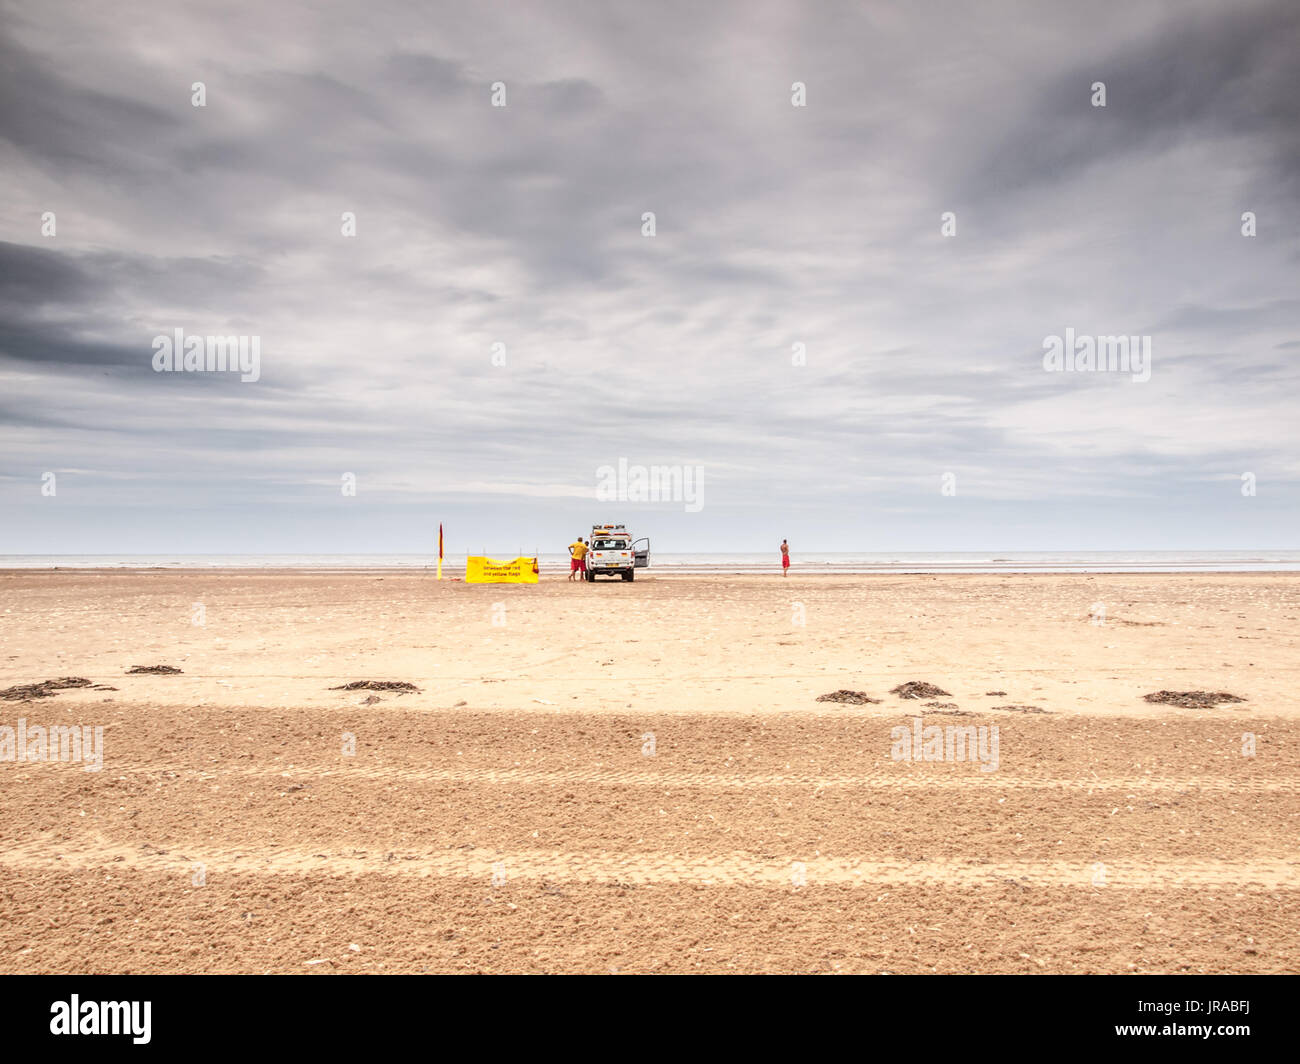 RNLI Pickup Truck on a beach with big sky Stock Photo